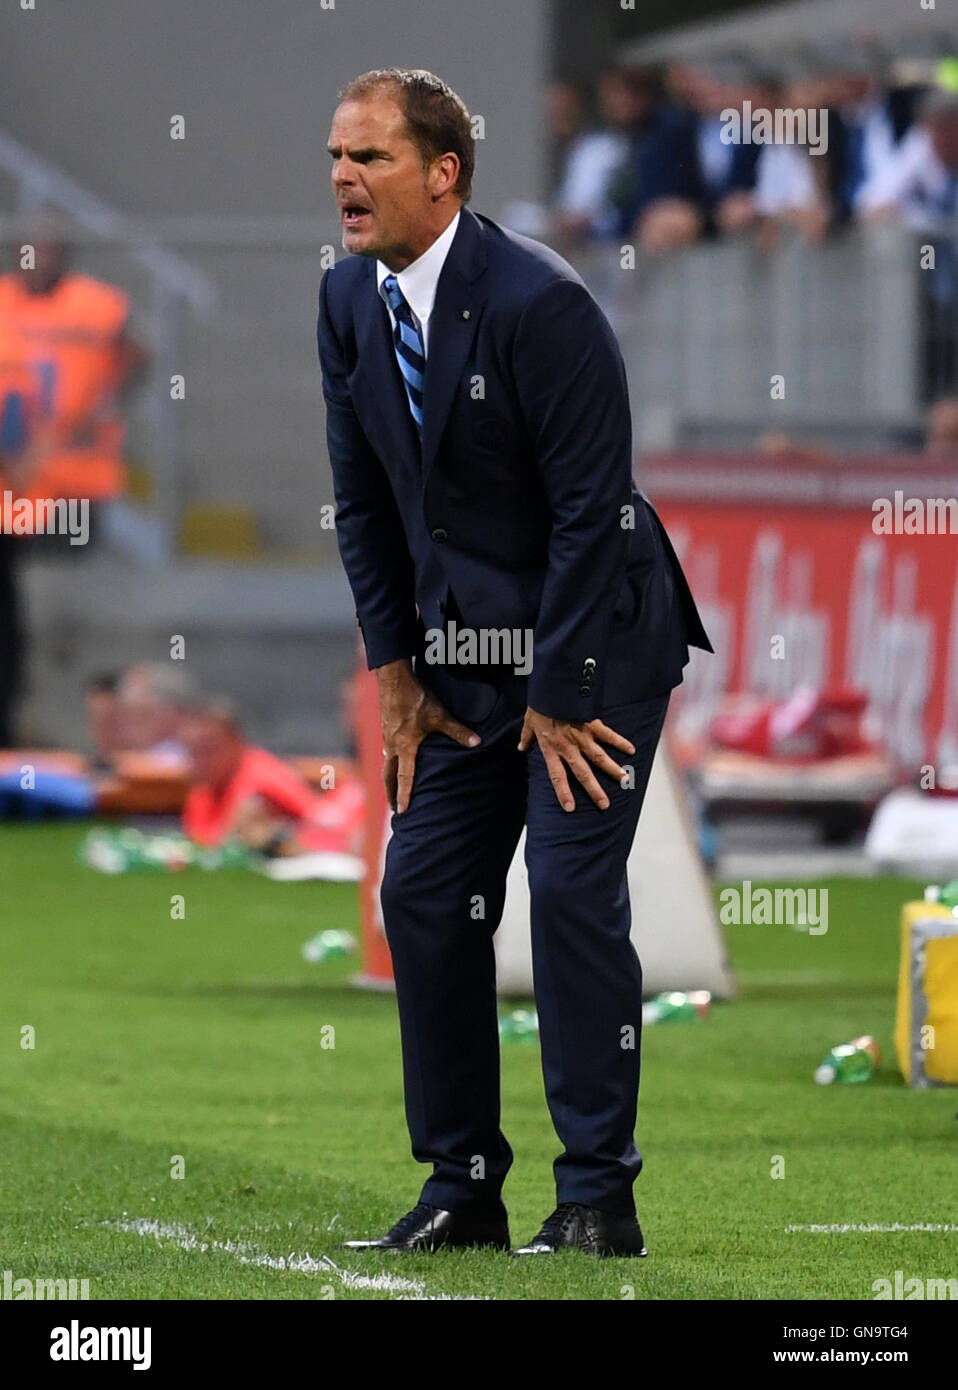 Milan, Italy. 28th Aug, 2016. Inter Milan's head coach Frank De Boer reacts during an Italian Serie A football match against Palermo in Milan, Italy, on Aug. 28, 2016. The match ended with a 1-1 draw. Credit:  Alberto Lingria/Xinhua/Alamy Live News Stock Photo